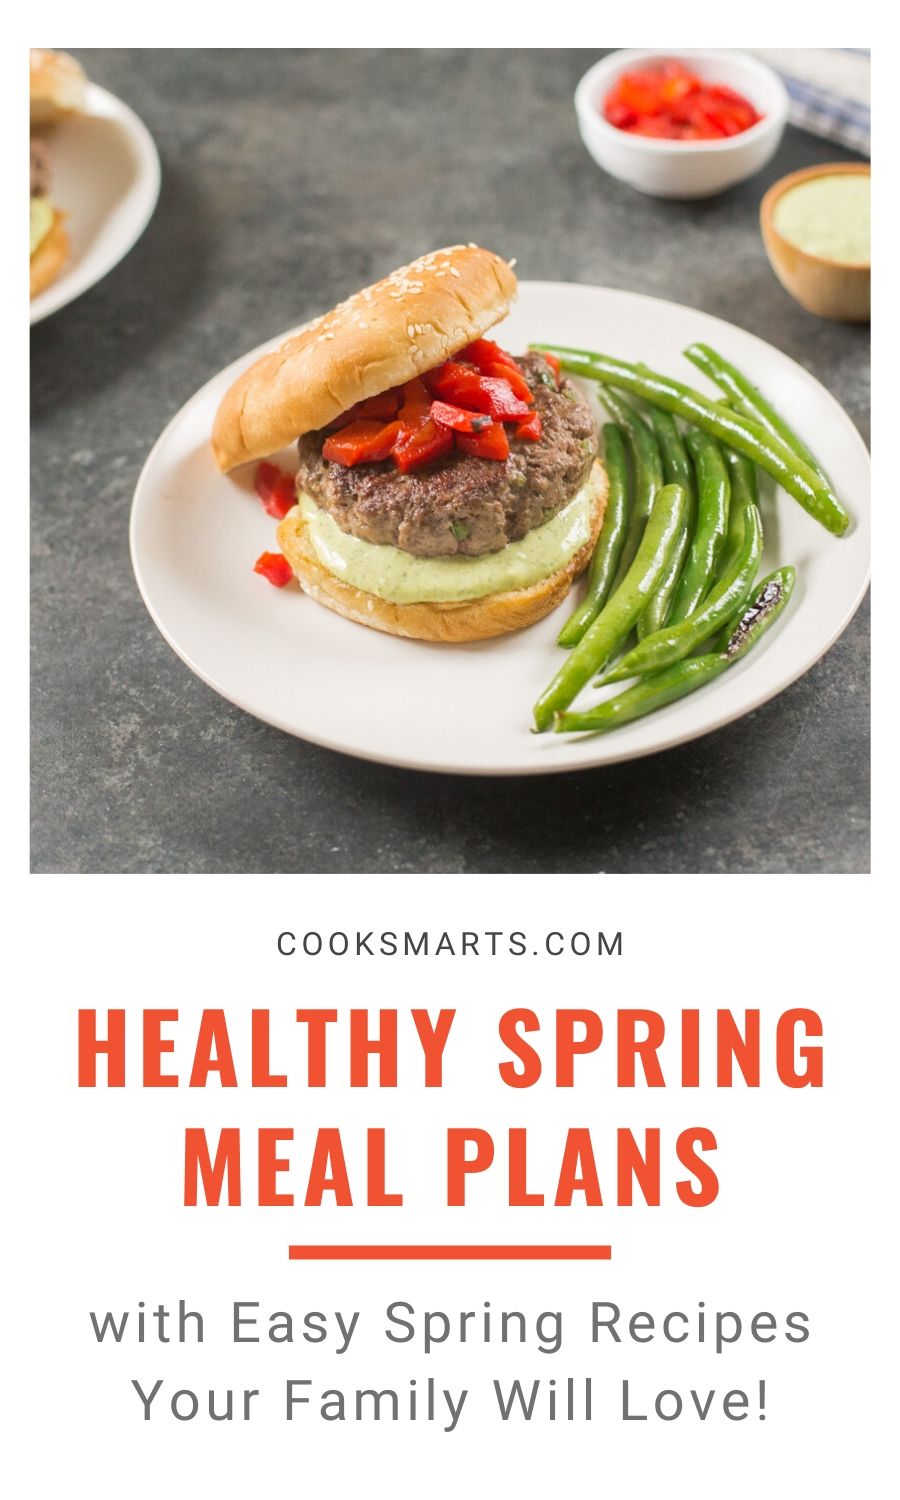 Easy Spring Meal Plans Recipe Book | Cook Smarts